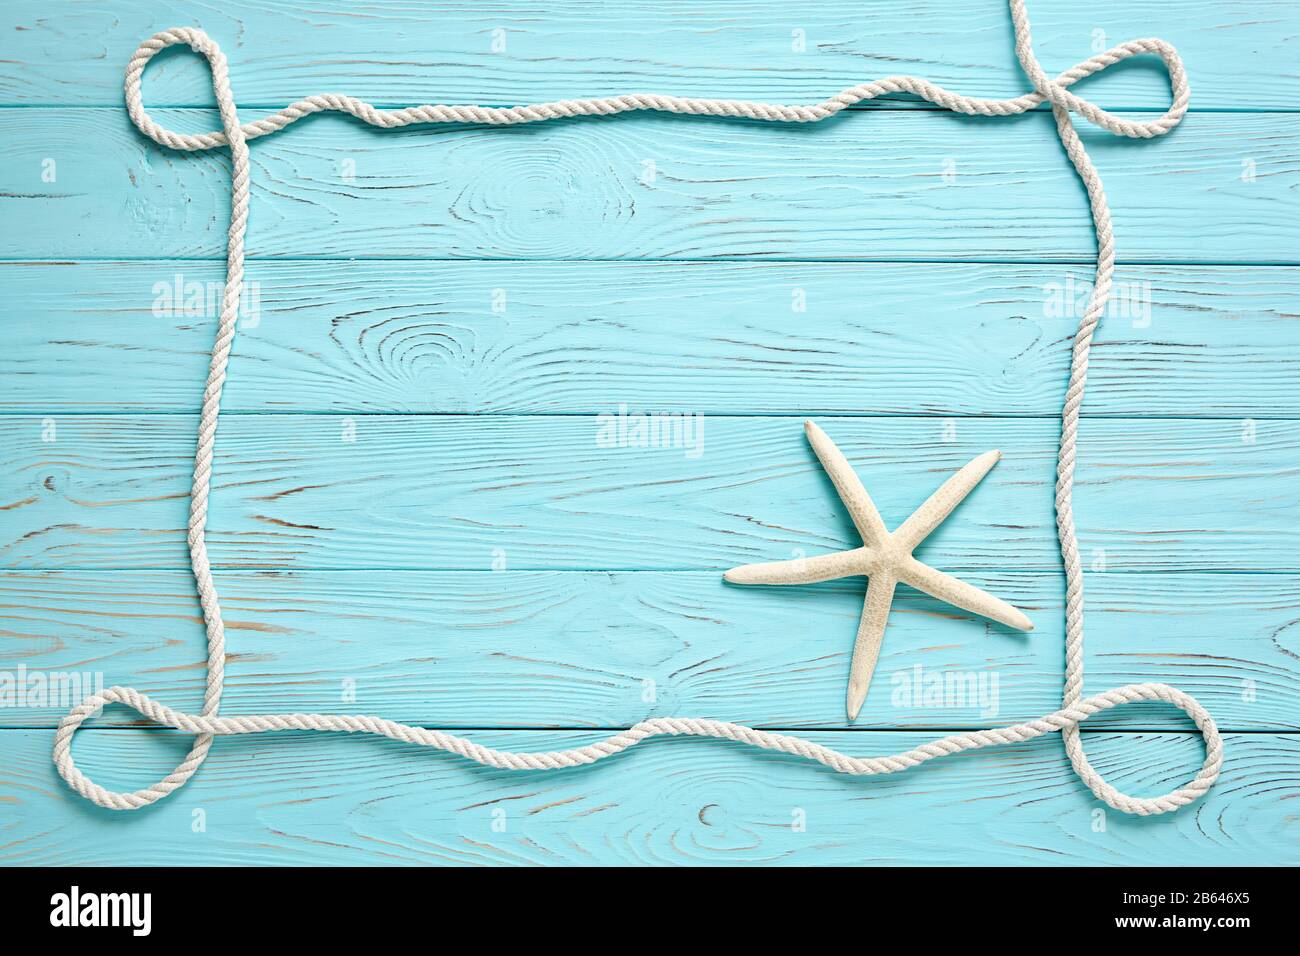 Frame made of white rope on a wooden blue background. Summer time sea vacation concept. Place for your text. Stock Photo